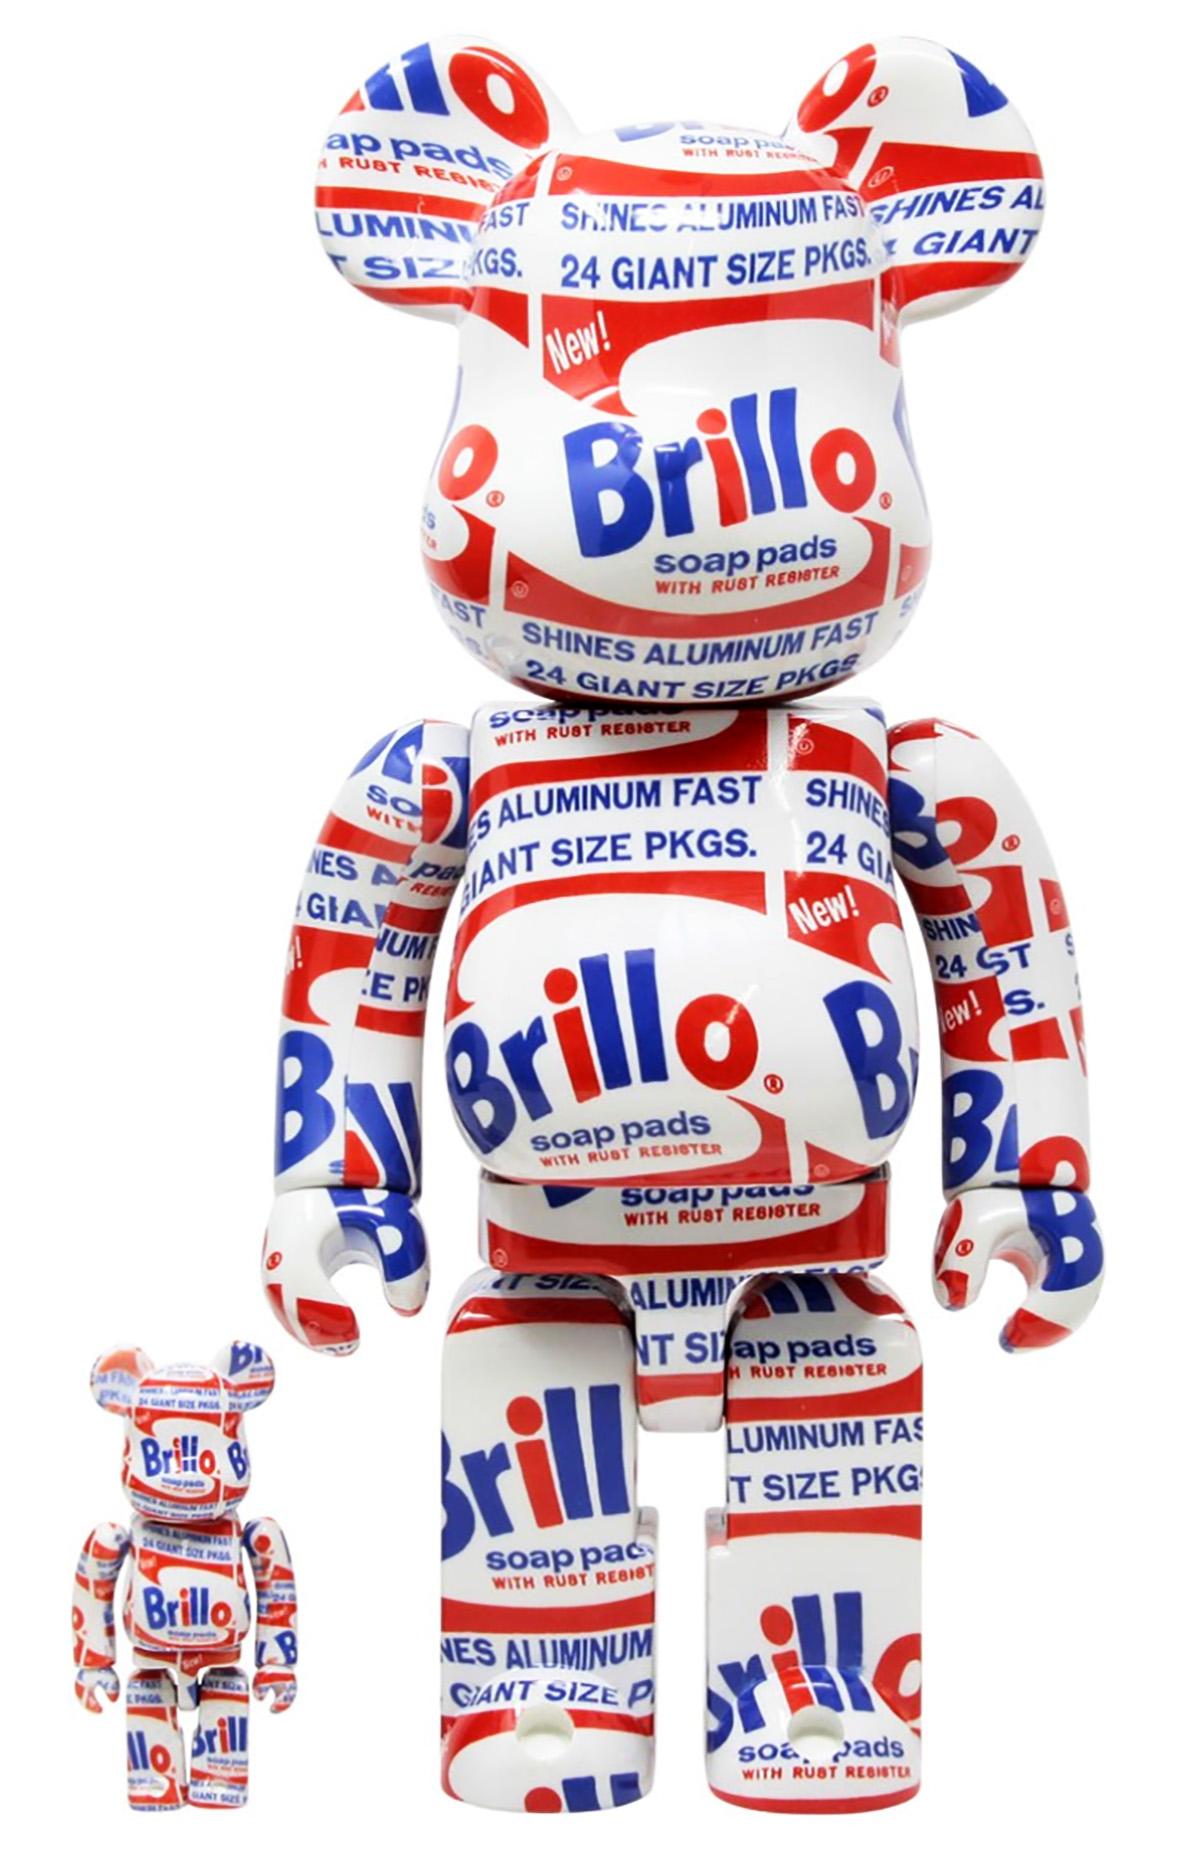 (after) Andy Warhol Figurative Sculpture - Andy Warhol Be@rbrick 400% companion (Warhol Brillo Be@rbrick)